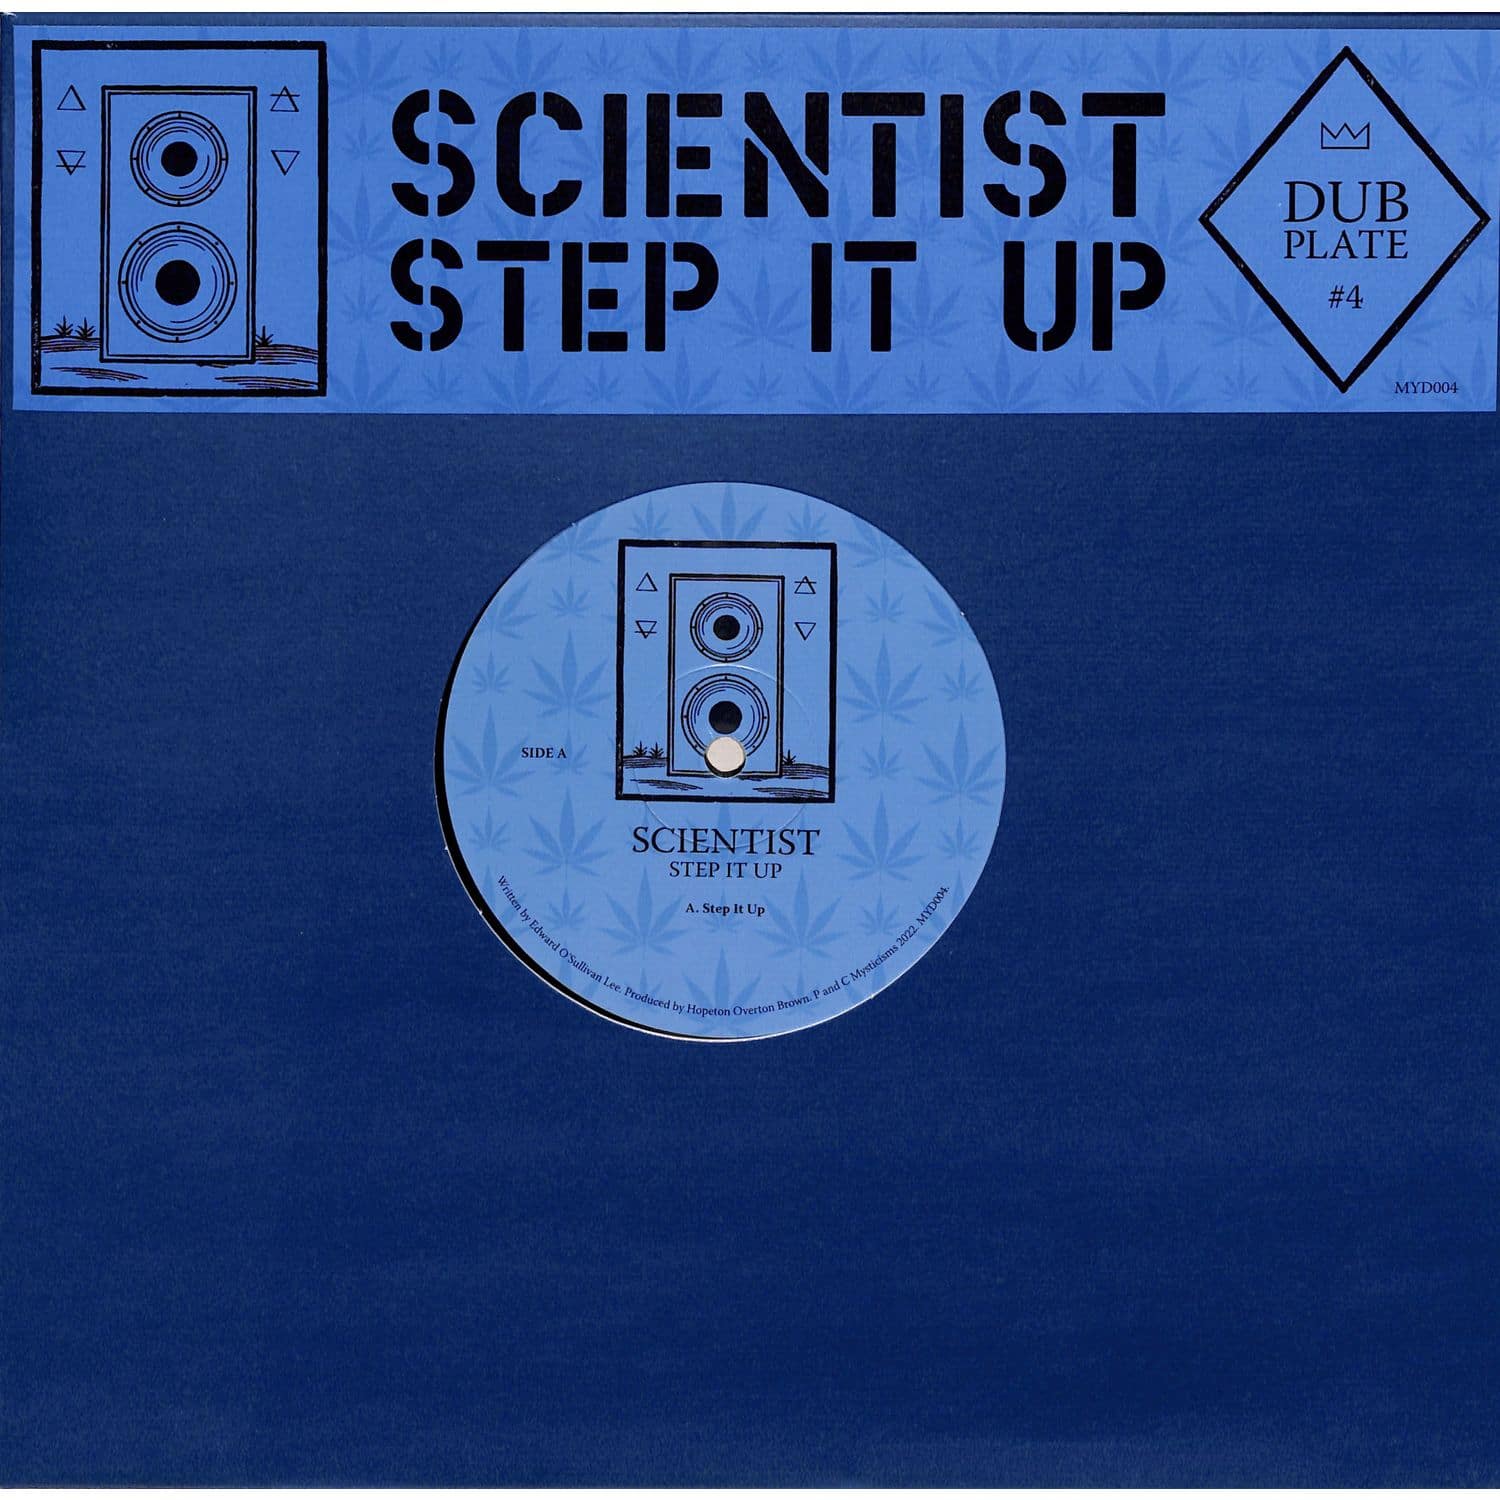 Scientist - DUBPLATE #4: STEP IT UP 